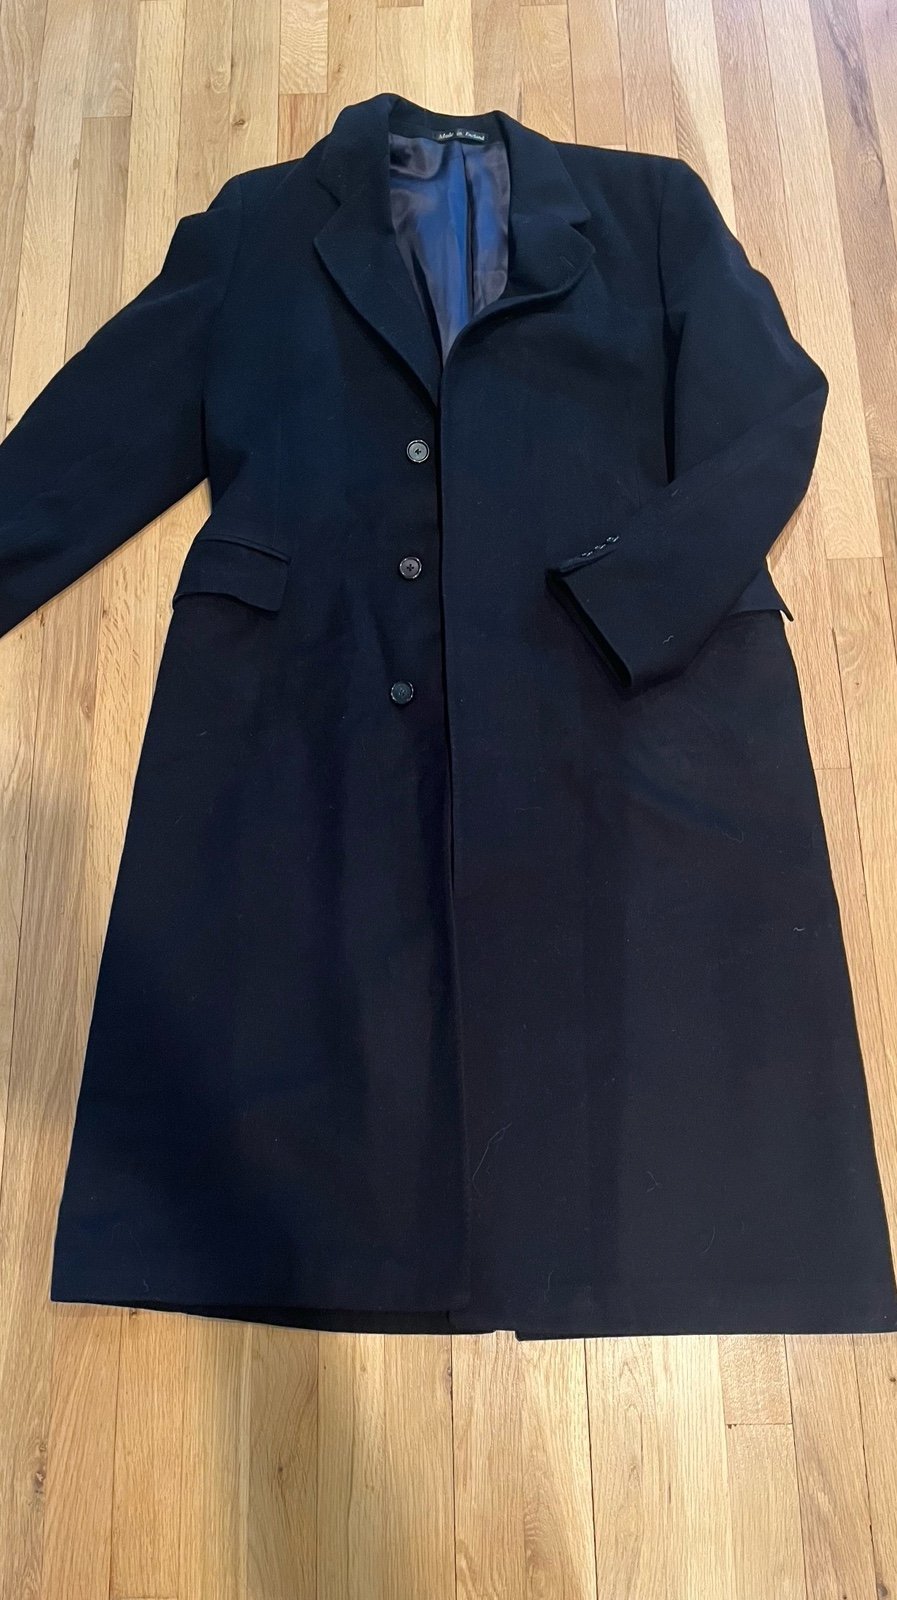 vintage Burberry wool and cashmere long coat pjcNl63jz